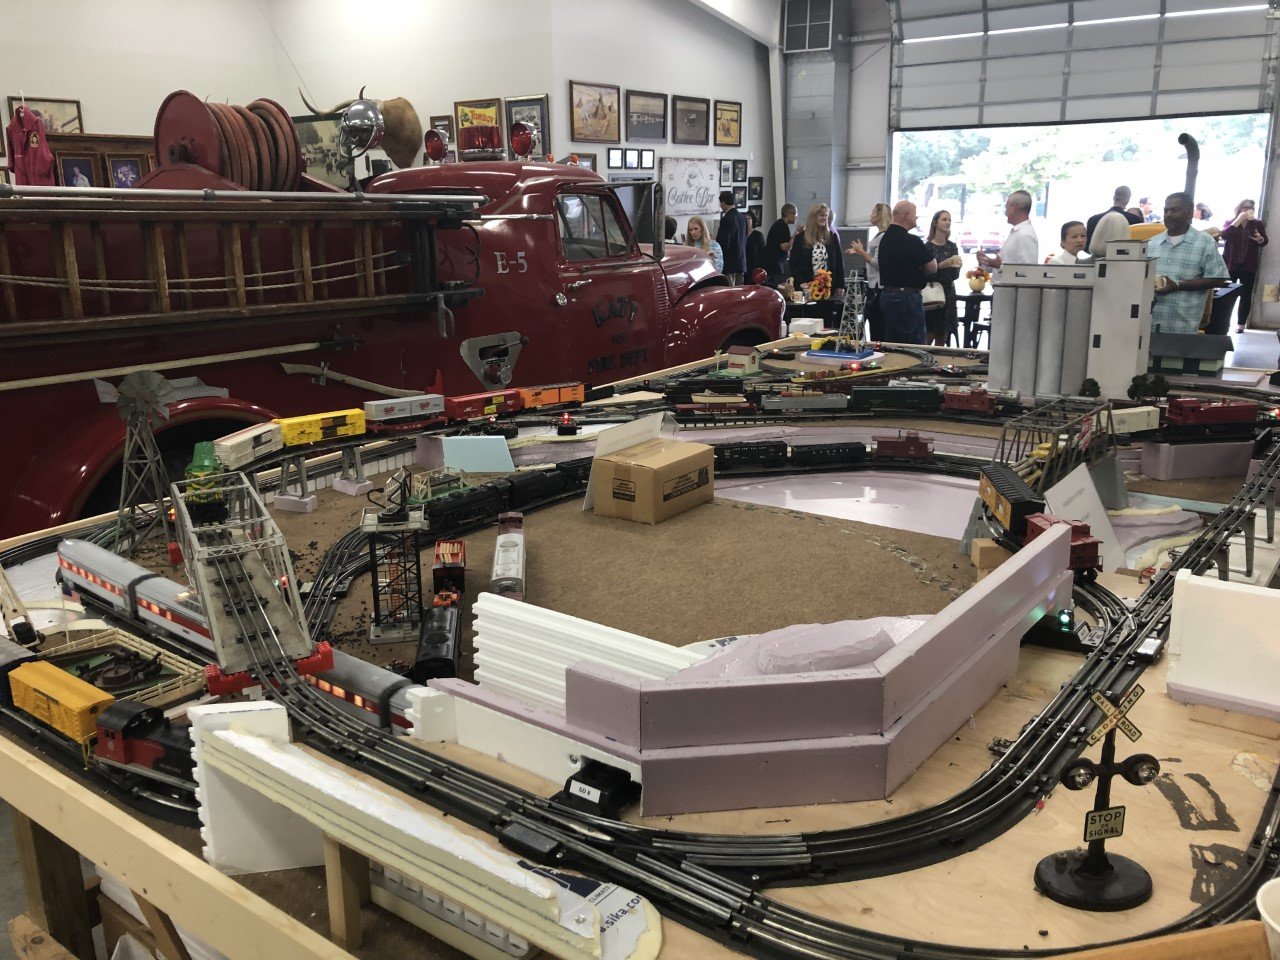 The model railroad at the Johnny Nelson Katy Heritage Museum is a popular attraction with museum visitors.